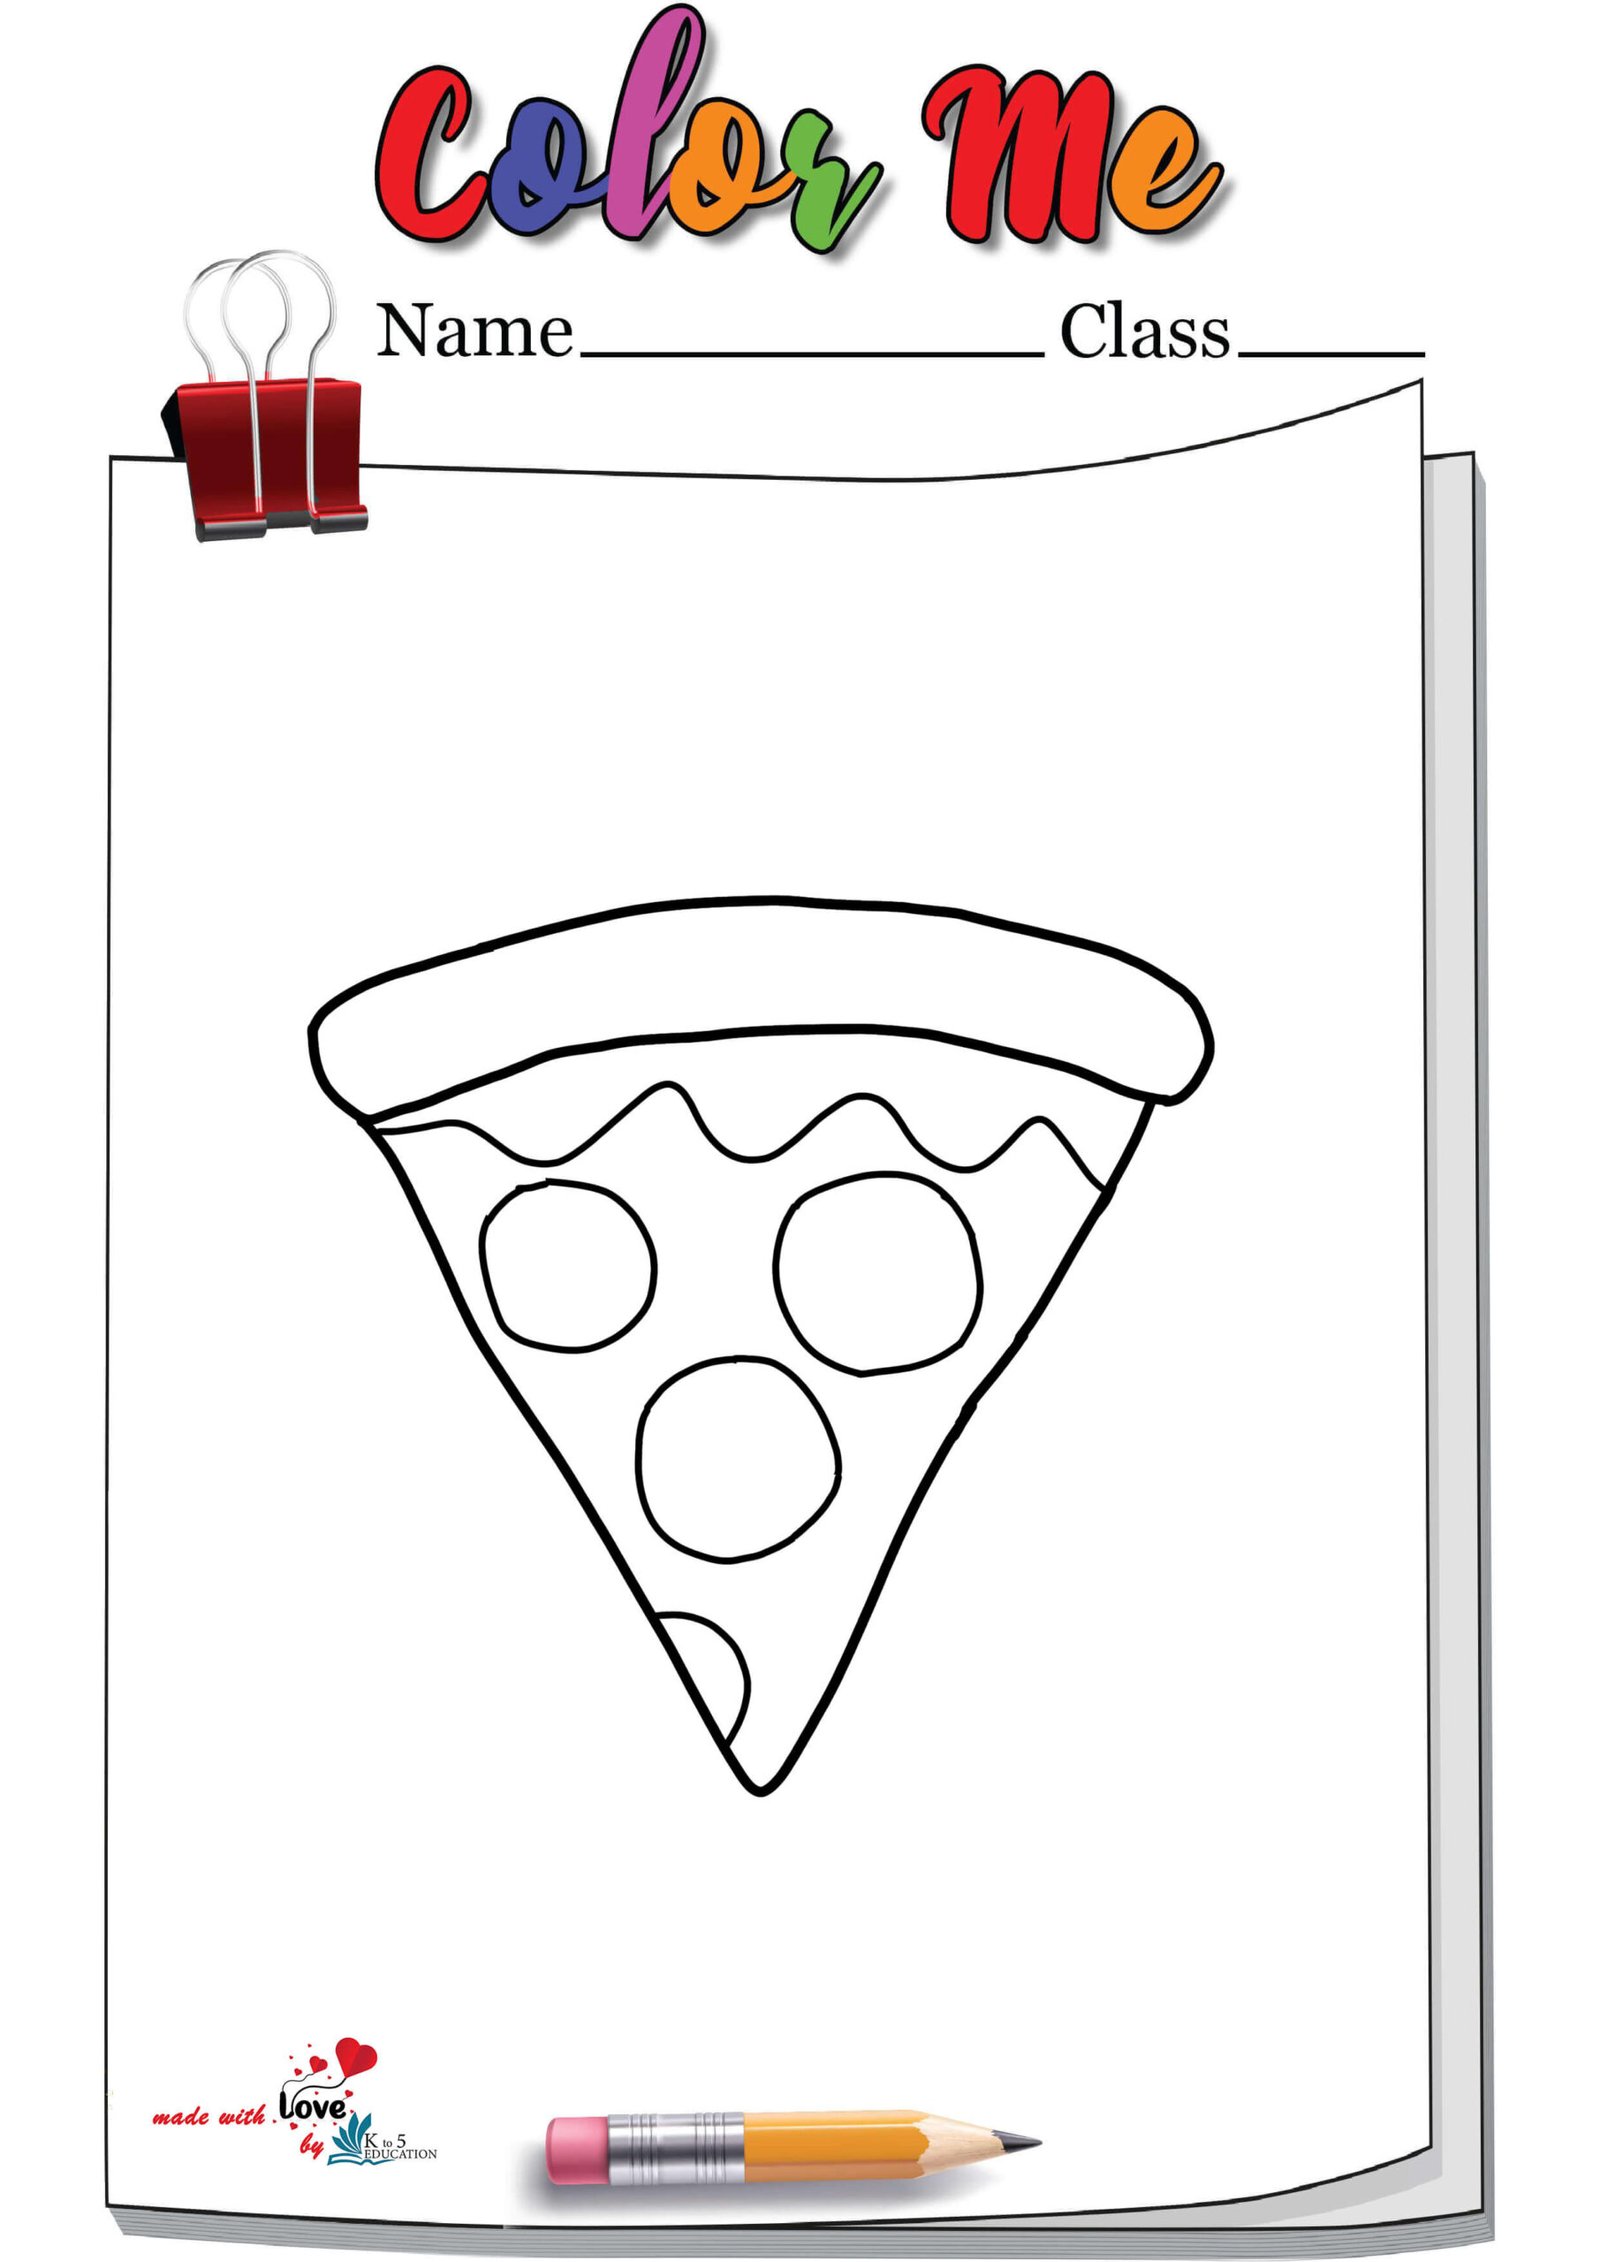 Slice Of Pepperoni pizza Coloring Page